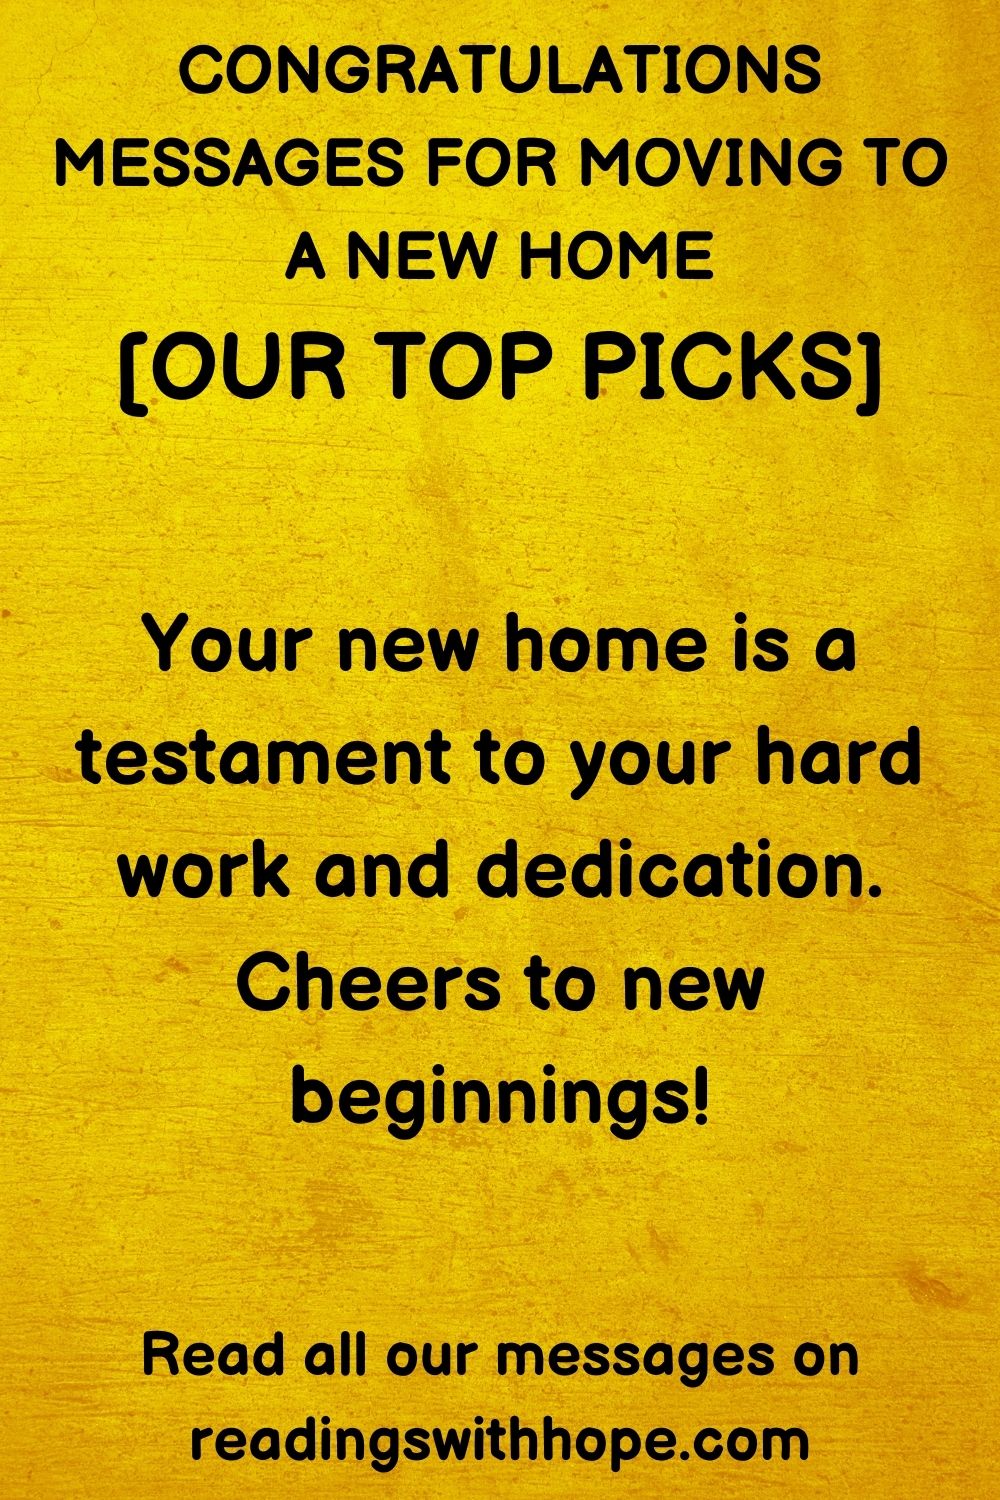 congratulations message for moving to a new home that says Your new home is a testament to your hard work and dedication. Cheers to new beginnings!